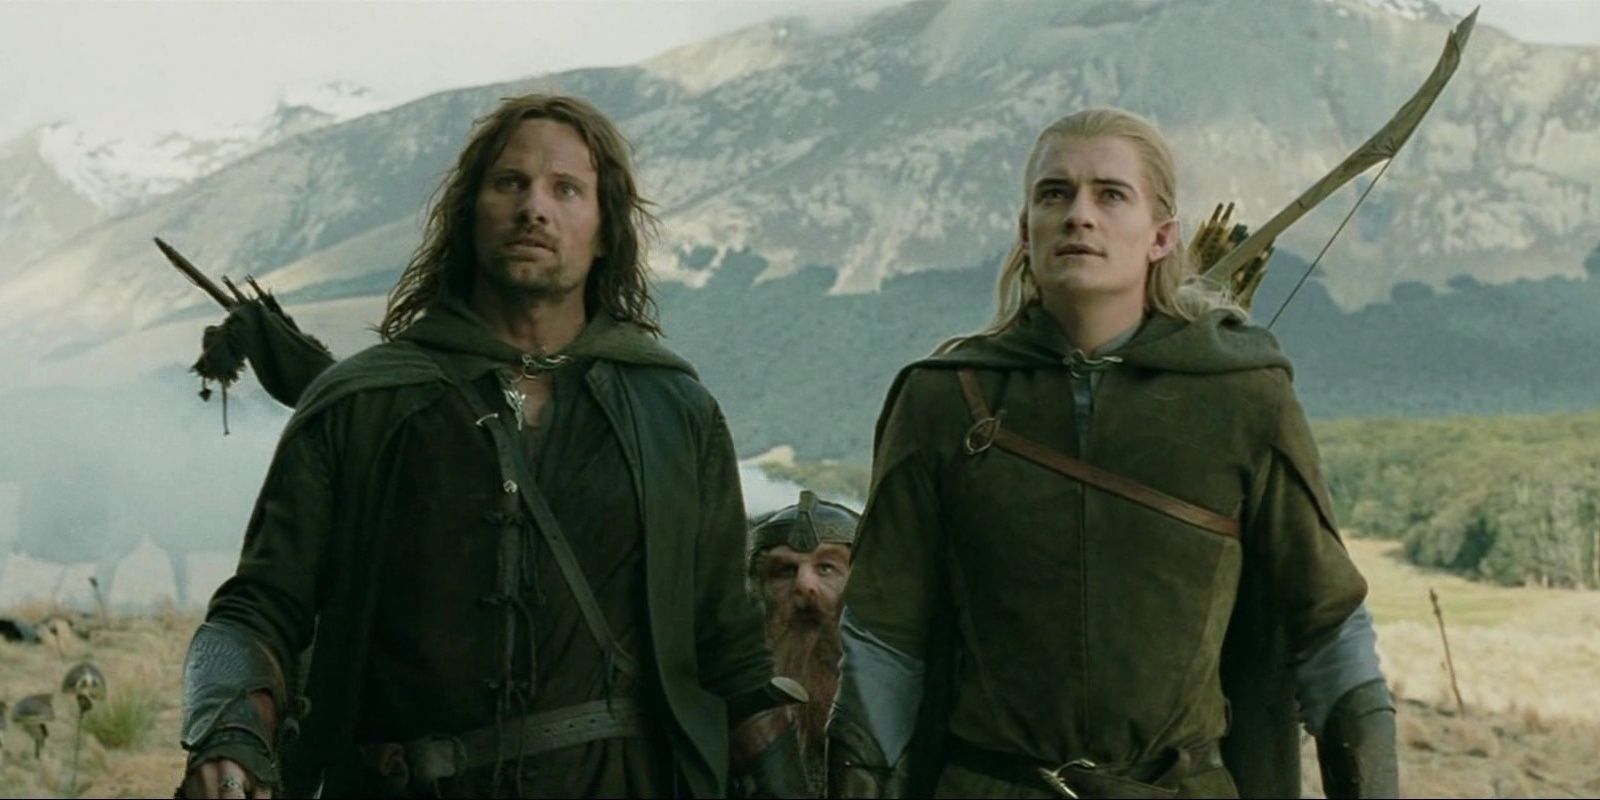 Aragorn anf Legolas standing next to each other in a field